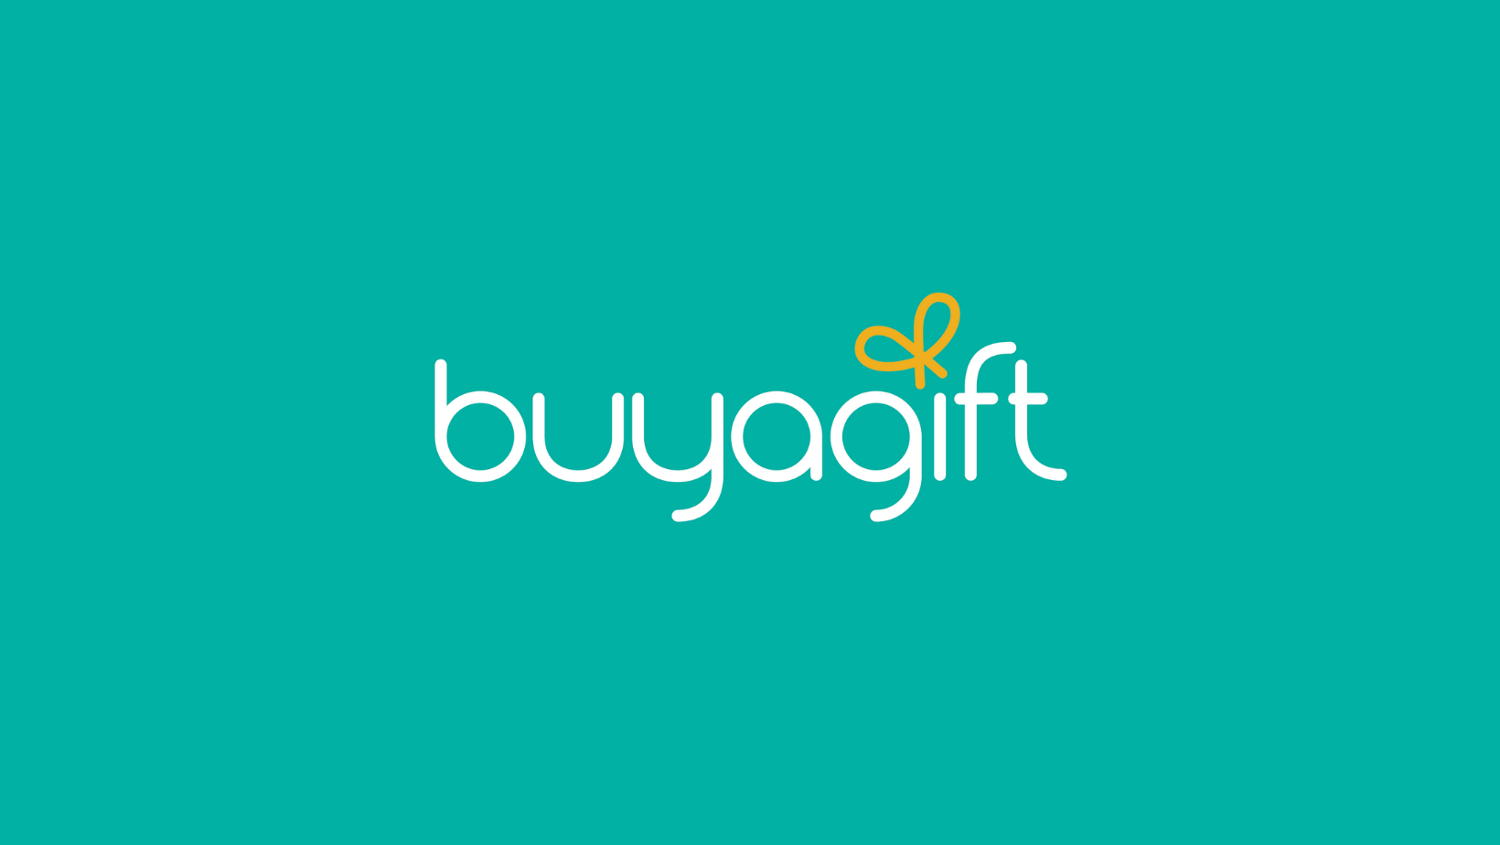 Buyagift launches Black Friday deals with up to 60% off select